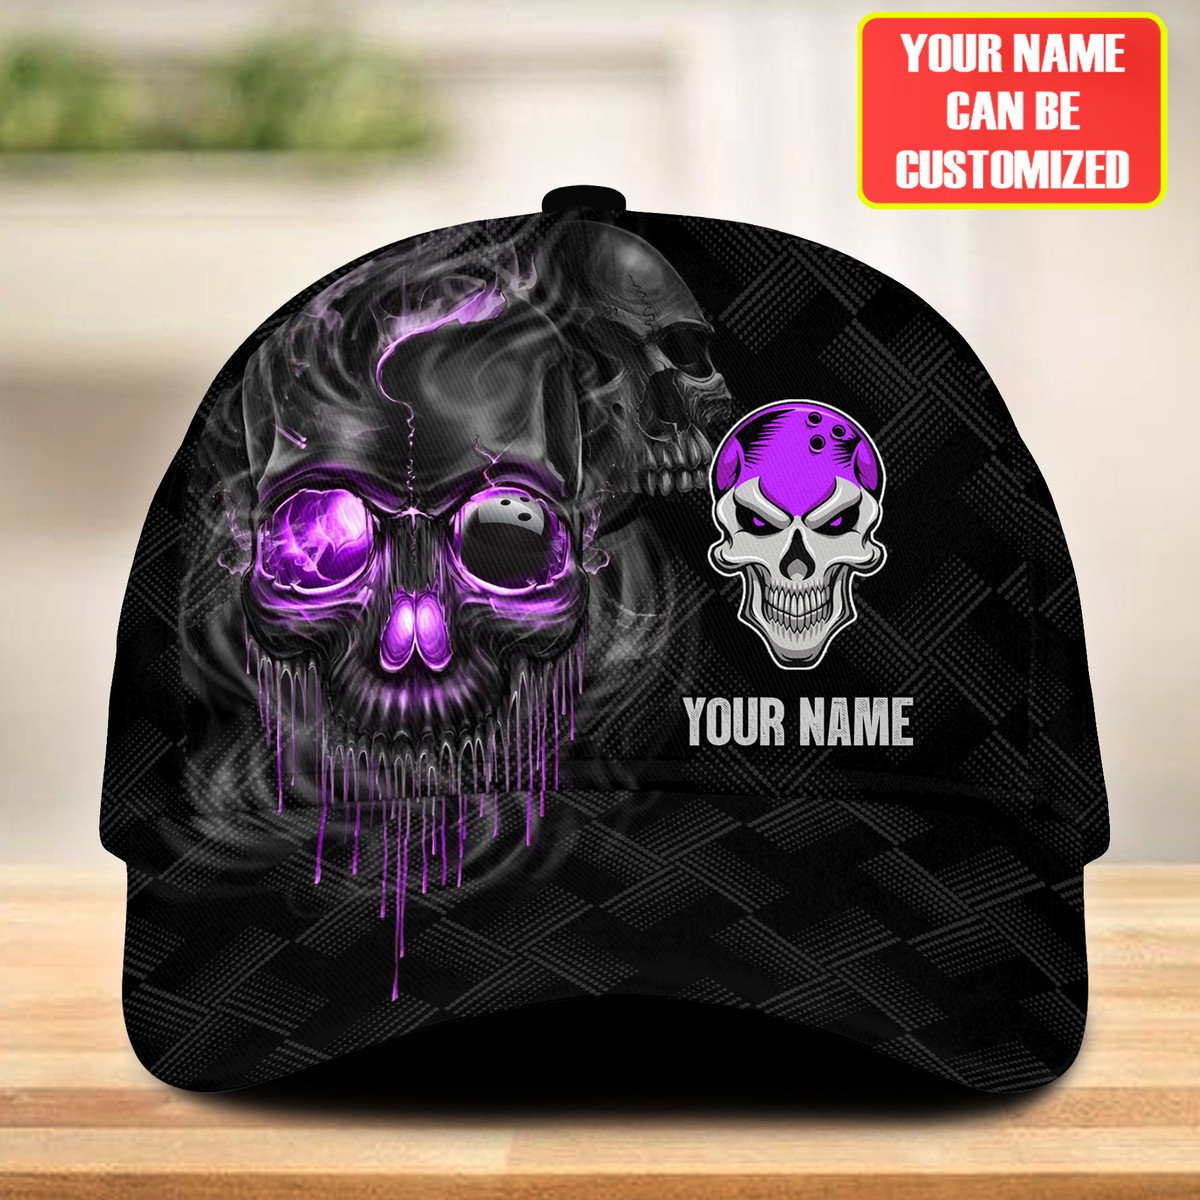 Personalized Name Multi Color Skull Bowling Classic Cap/ Skull Smoke Bowling Cap for Bowler/ Gift for Bowling Lover